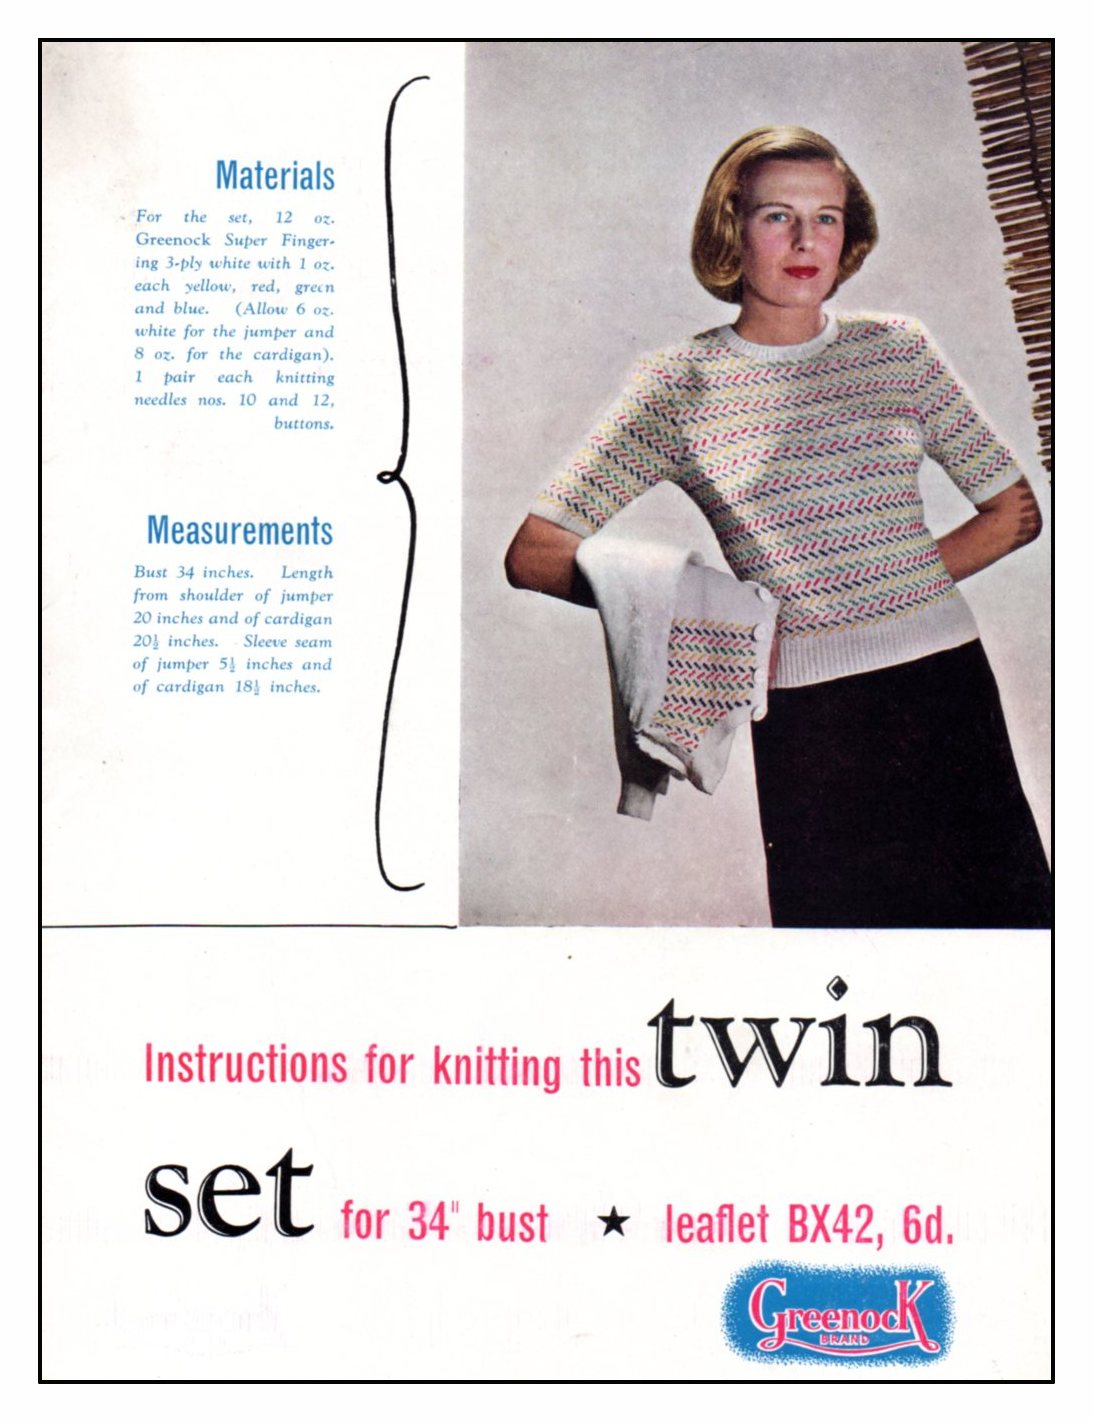 Cover of Greenock pattern with lady modelling horizonal zig-zag pattern sweater with short sleeves and holding a cardigan with similar pattern.